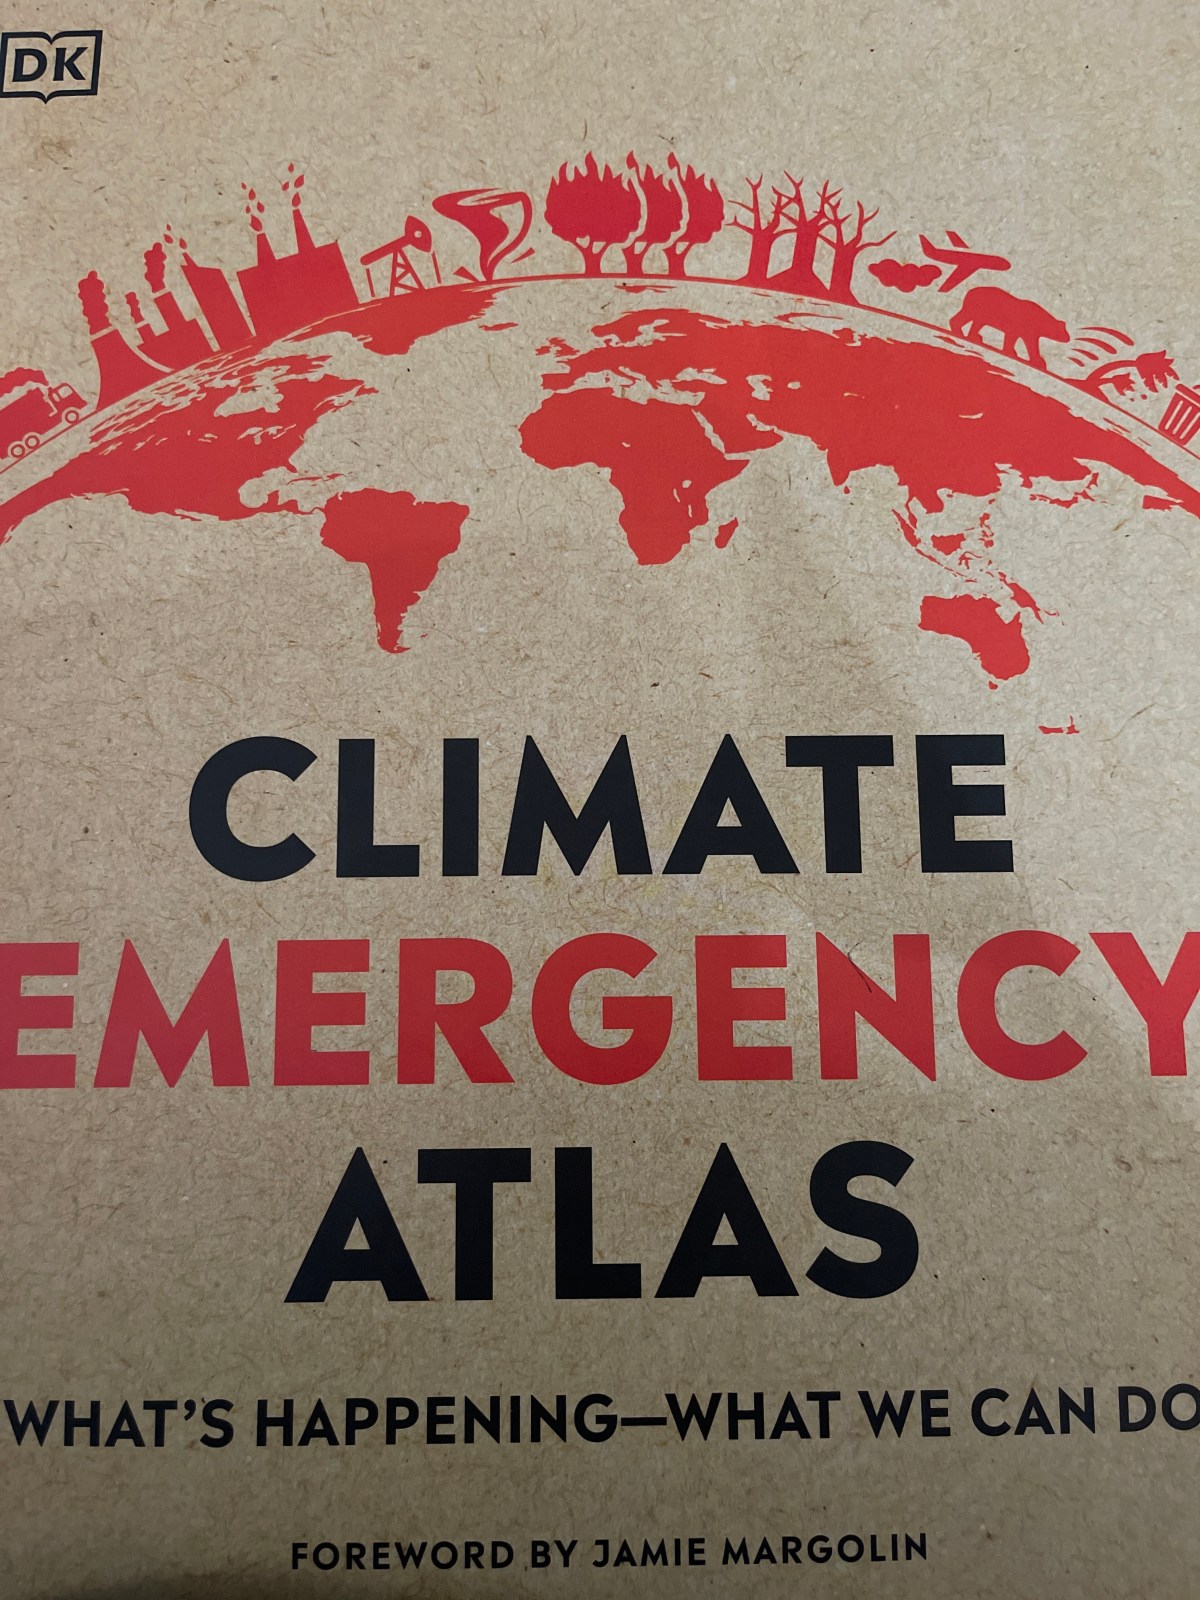 Background: What is the climate emergency?